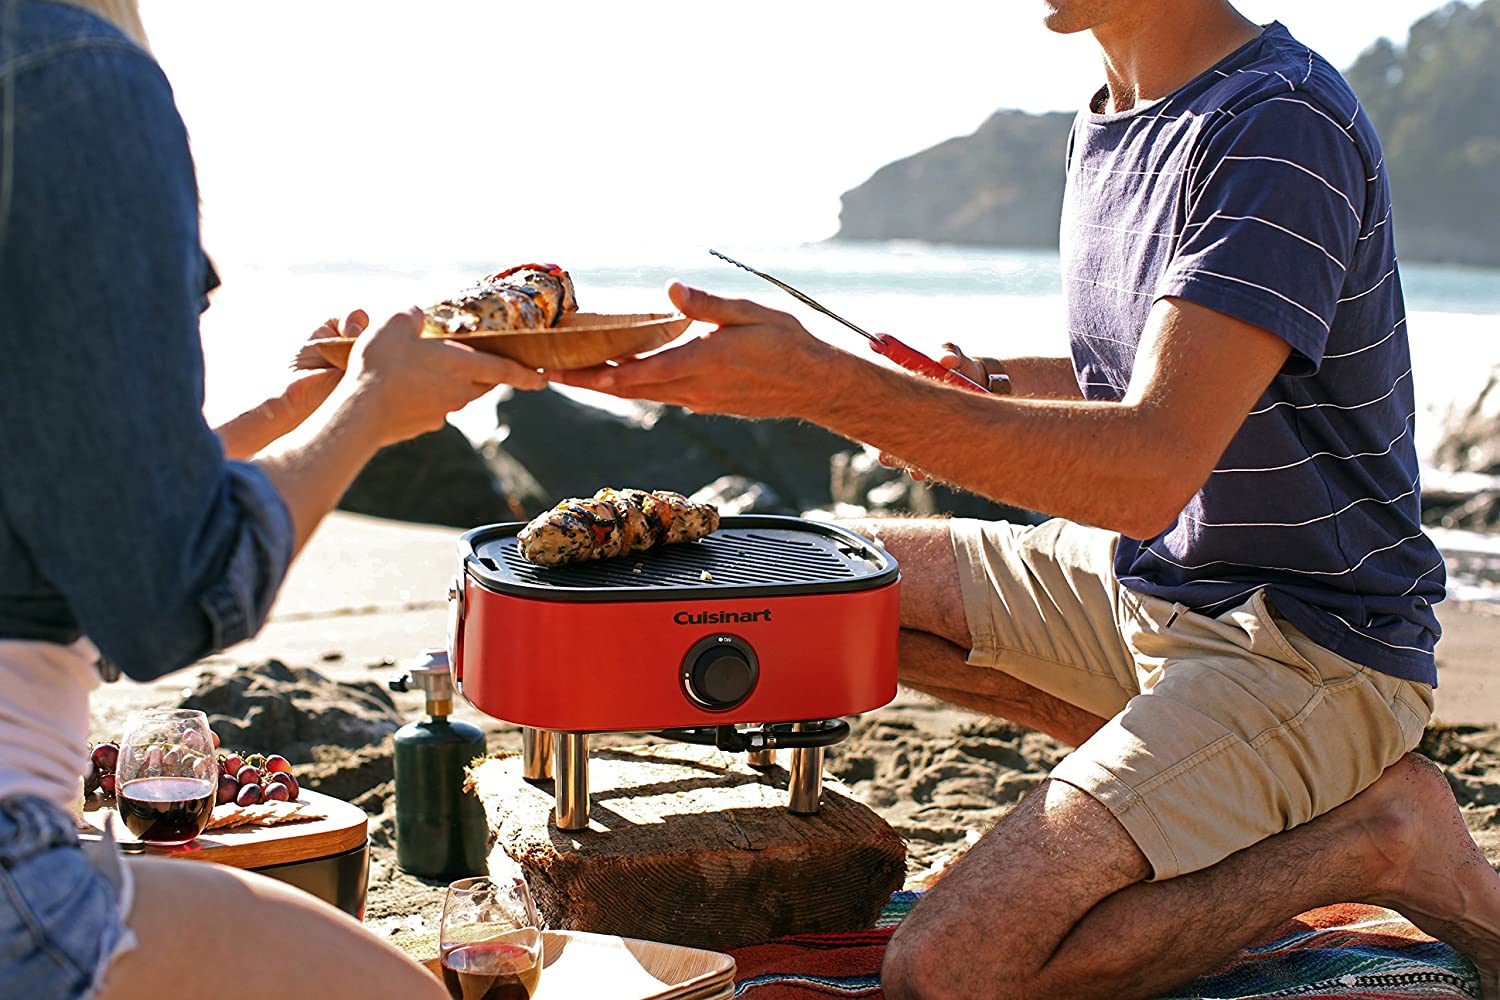 The Best Portable Grills in for Beaches, Backyard BBQs, Camping and More | Entertainment Tonight